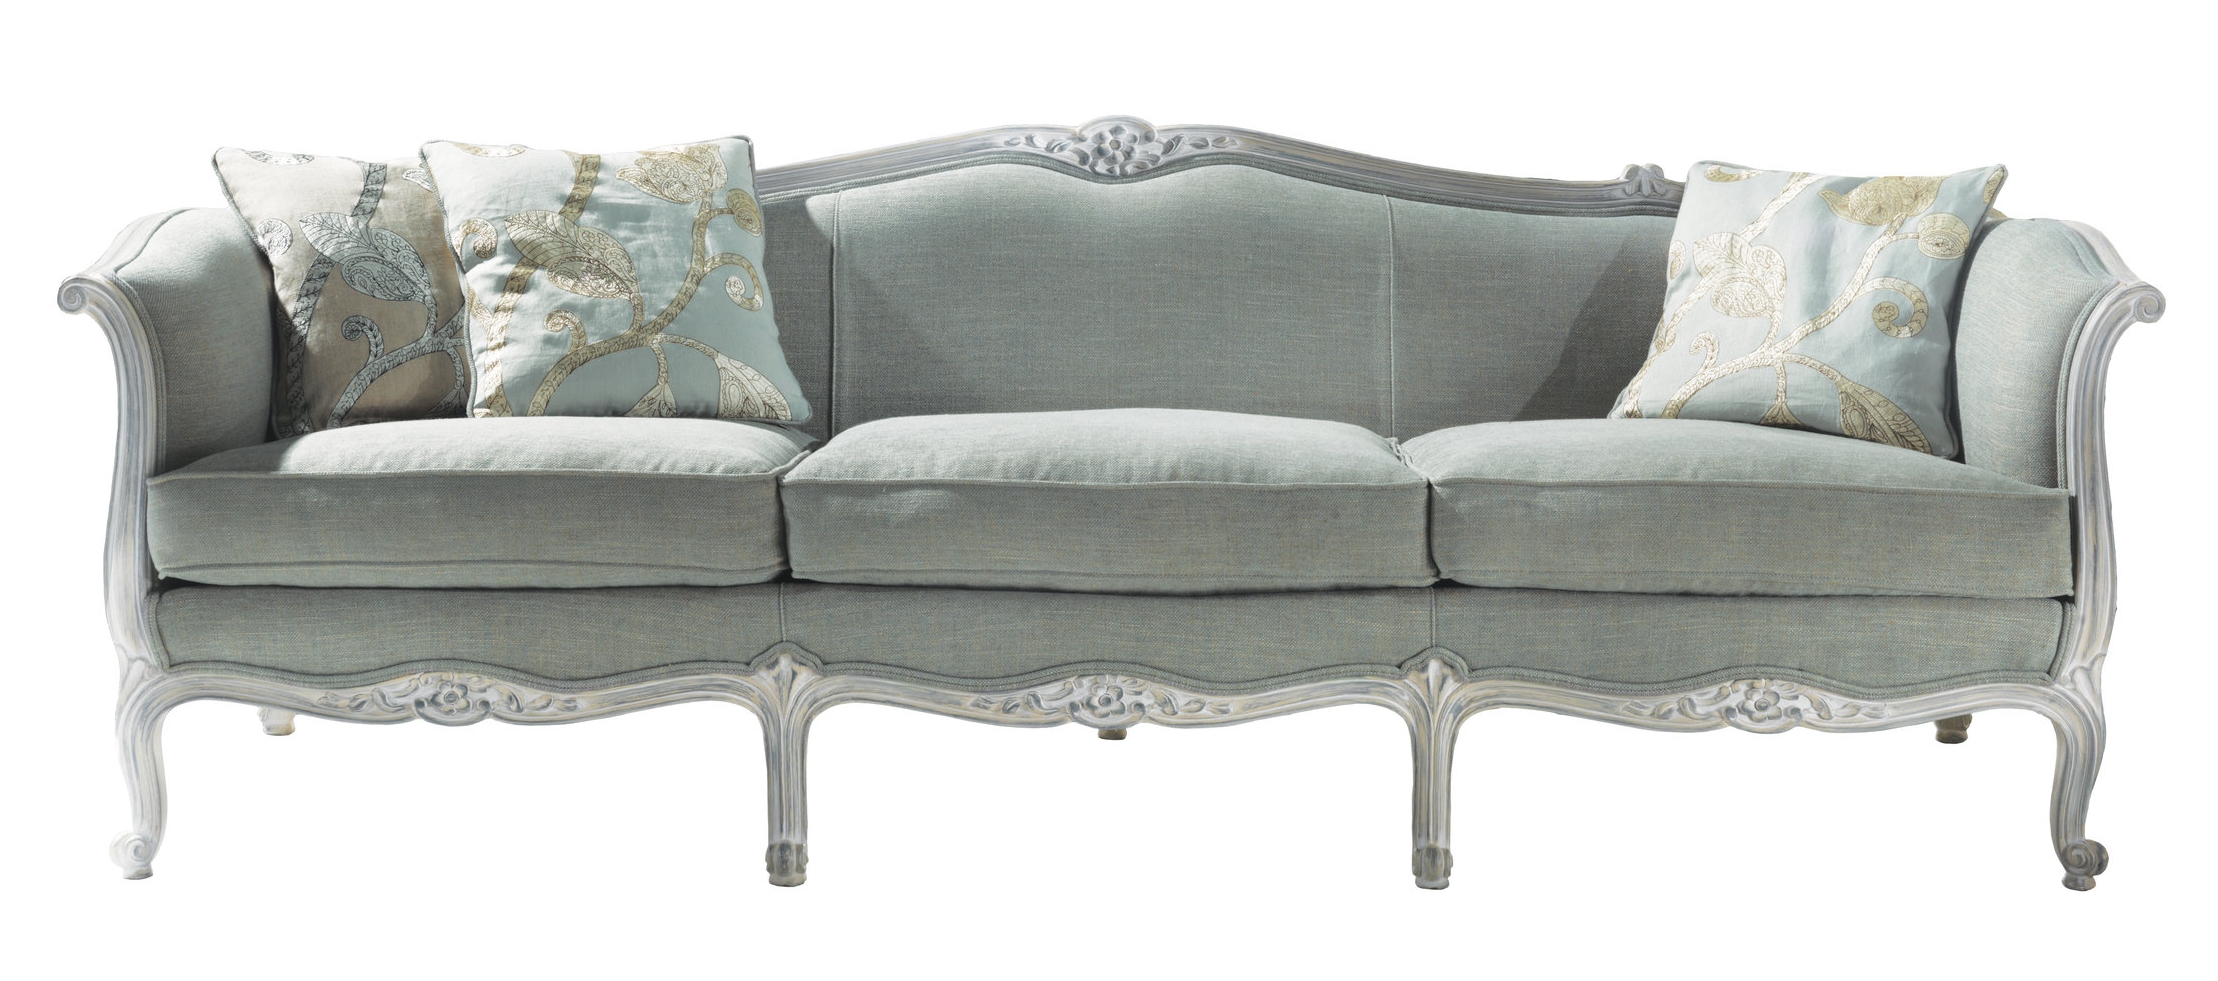 Angelo Cappellini 1748 sofa from Sarsfield Brooke